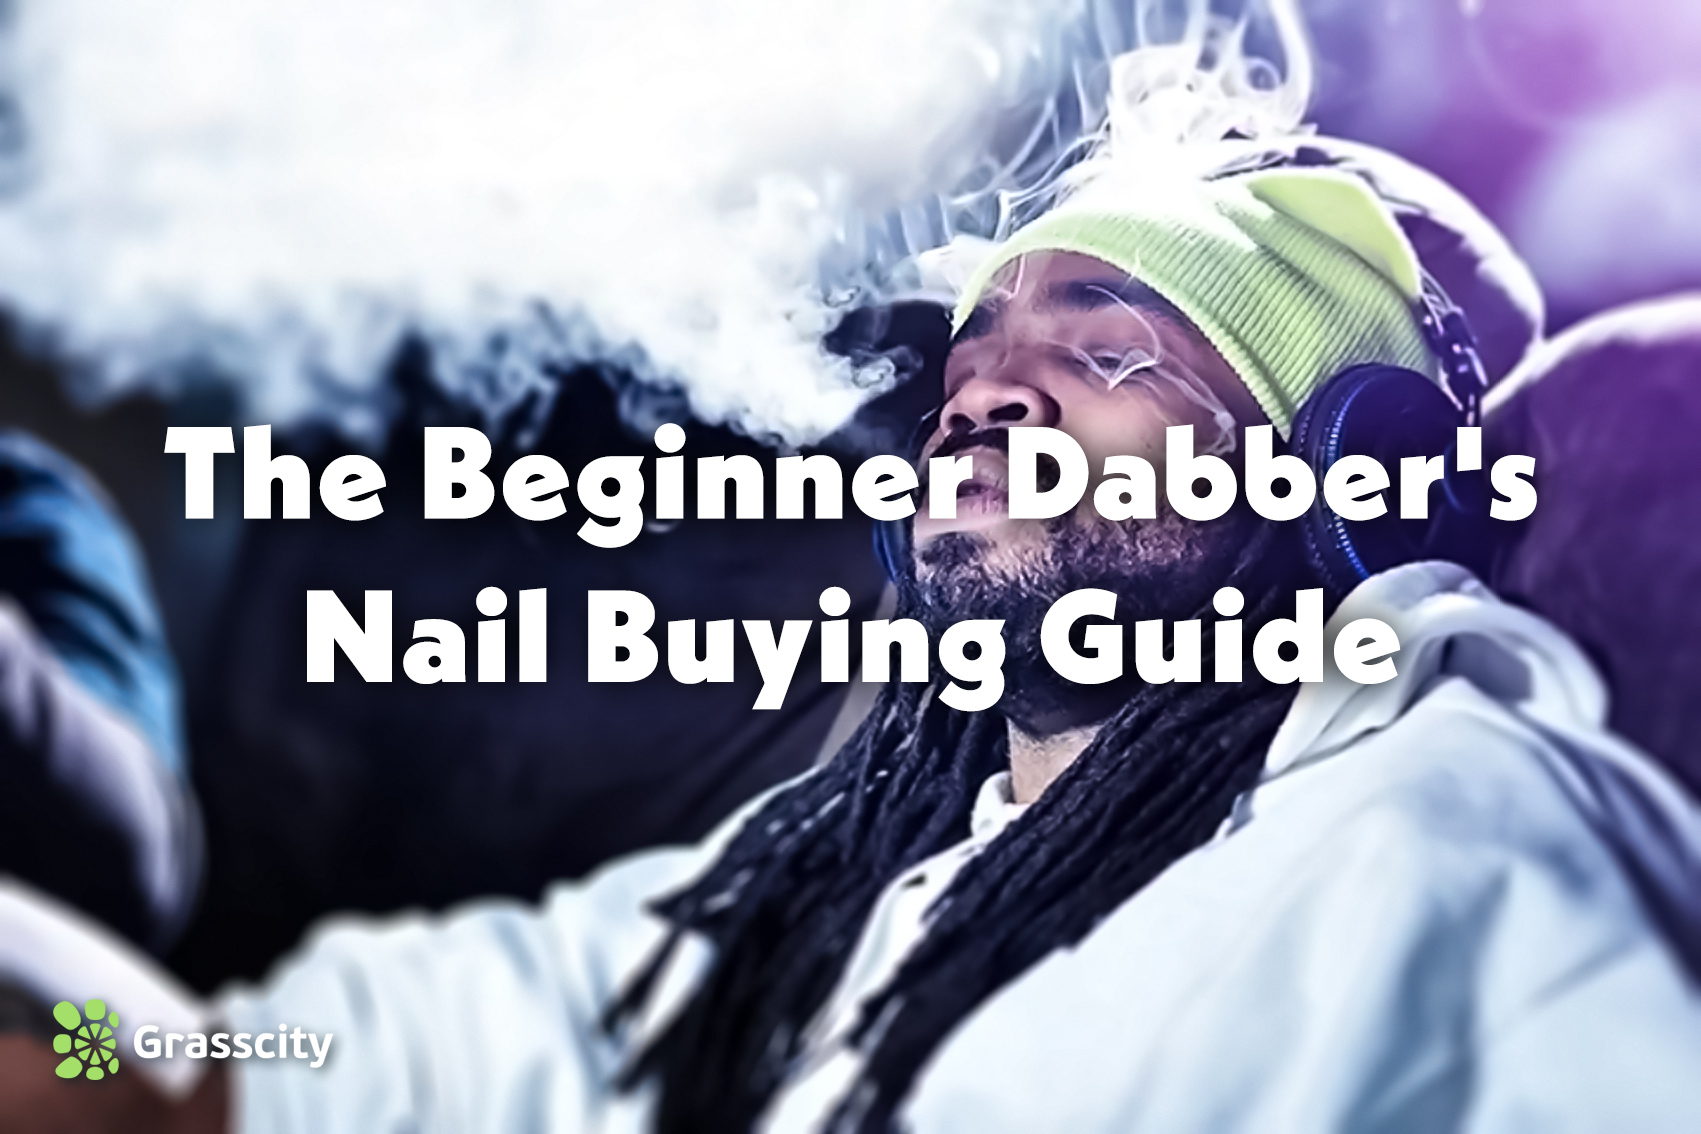 The Beginner Dabber's Nail Buying Guide